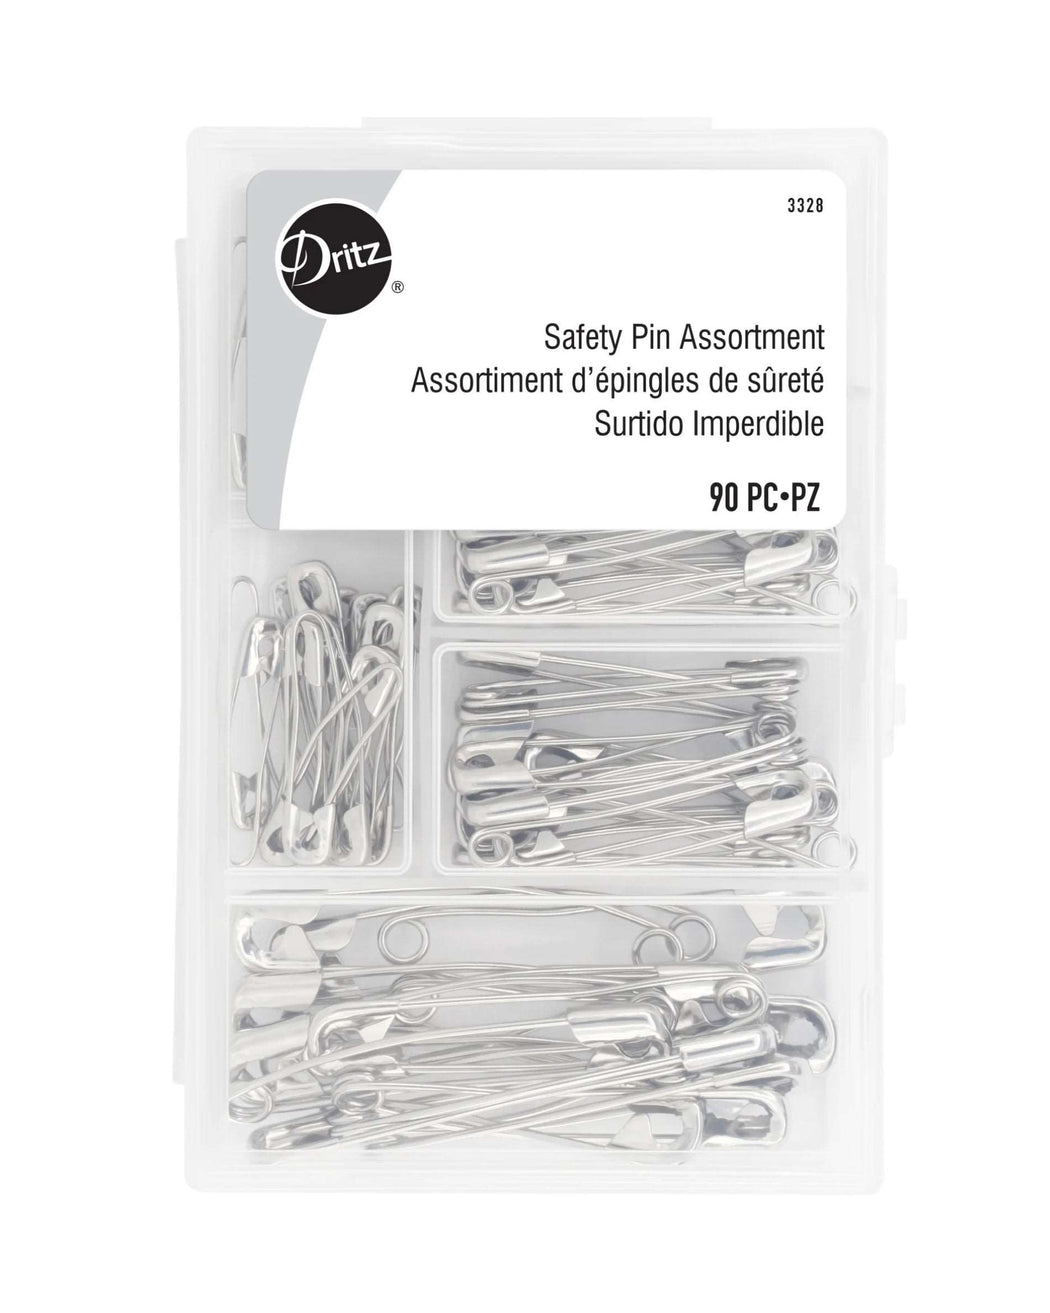 ASSORTED SAFETY PINS & STORAGE BOX - Zipper and Thread